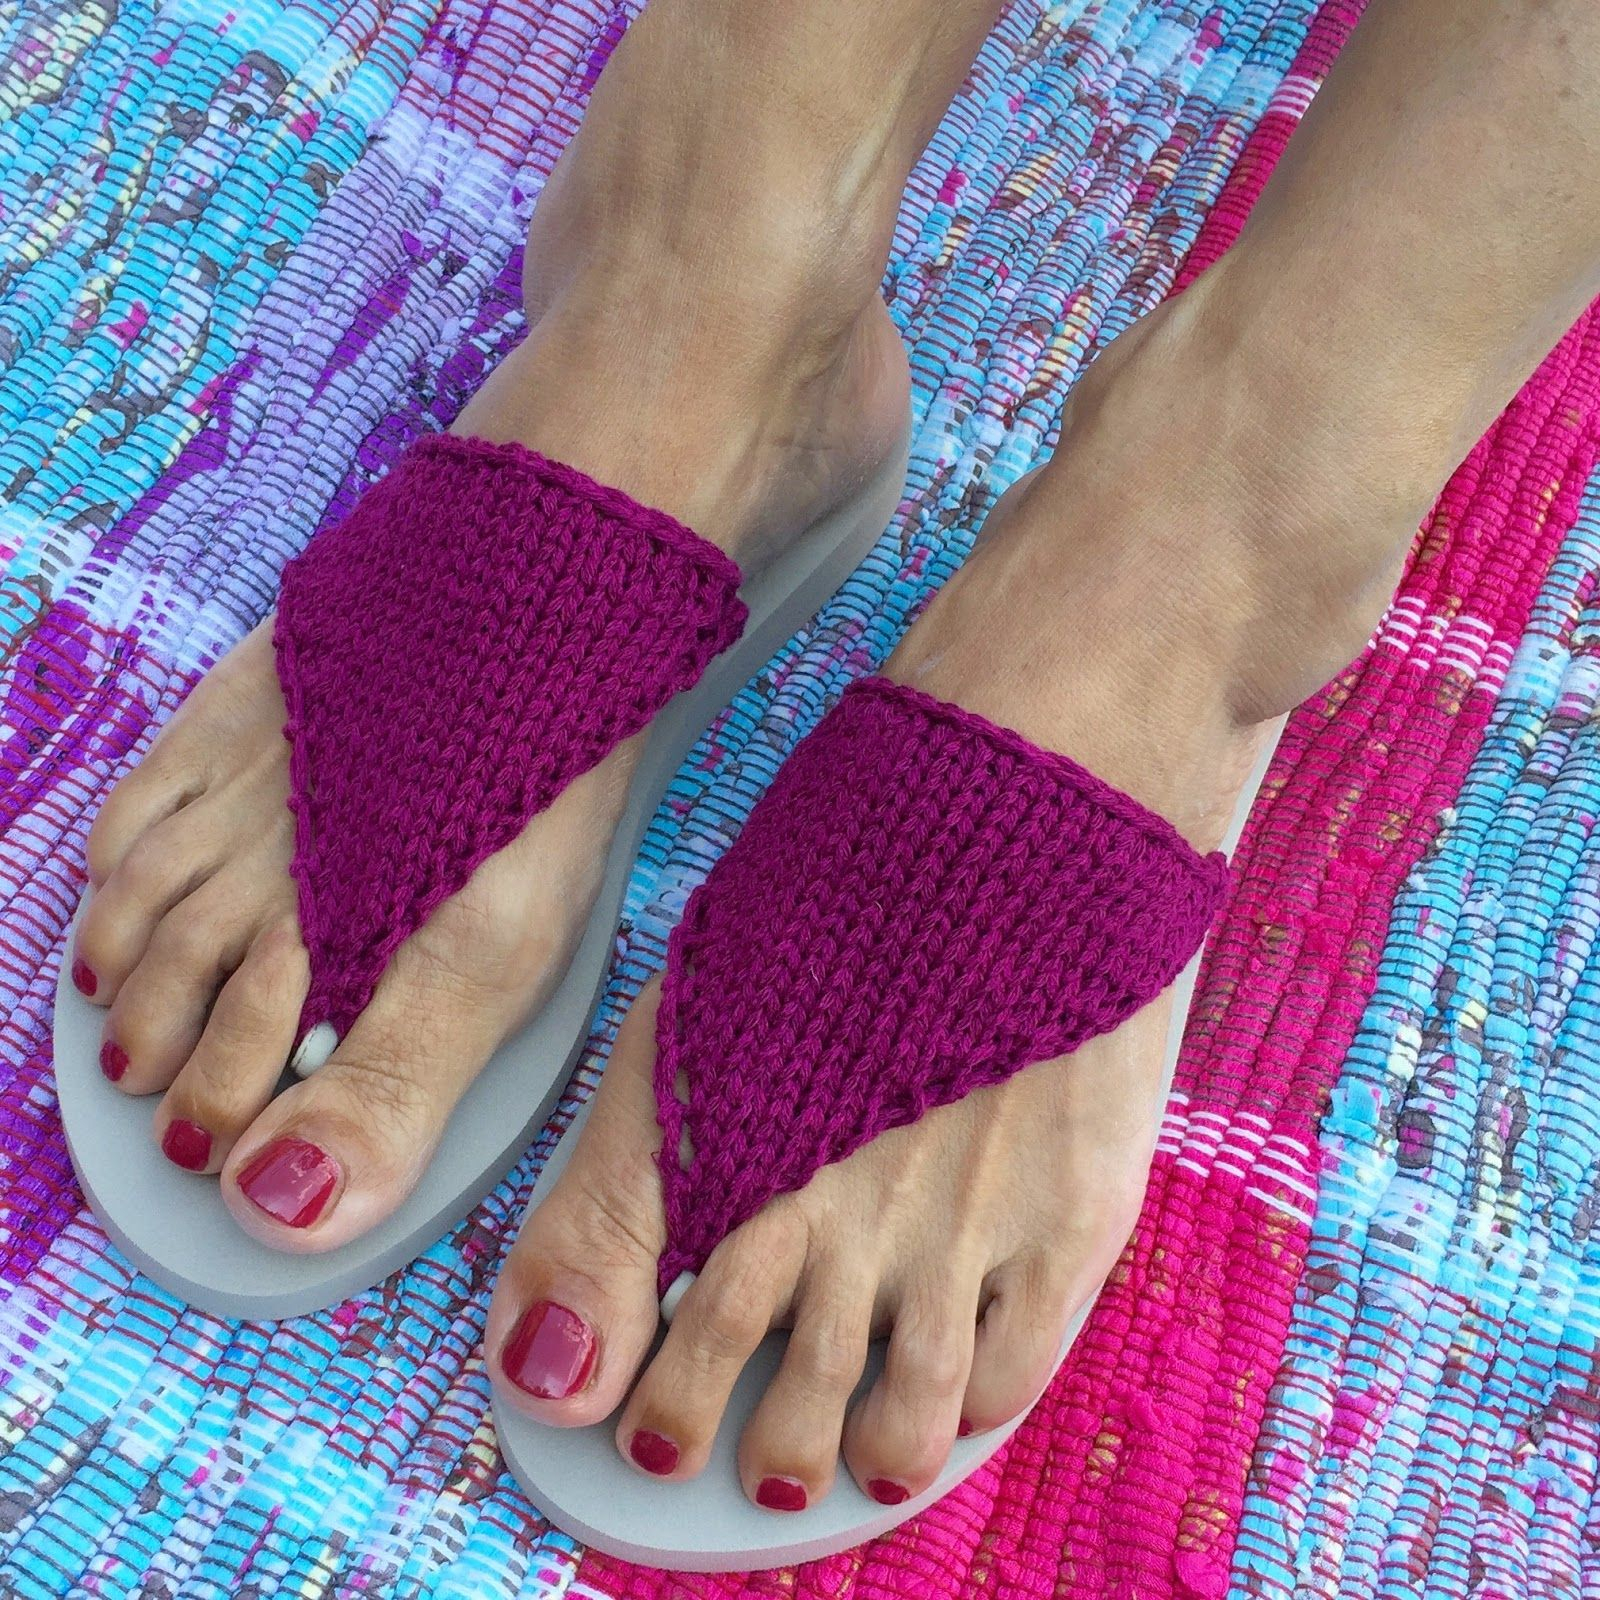 Knitted flip flop DIY Picturesque Flip Flops Ideas That Are Great For Indoor Or Beach Day